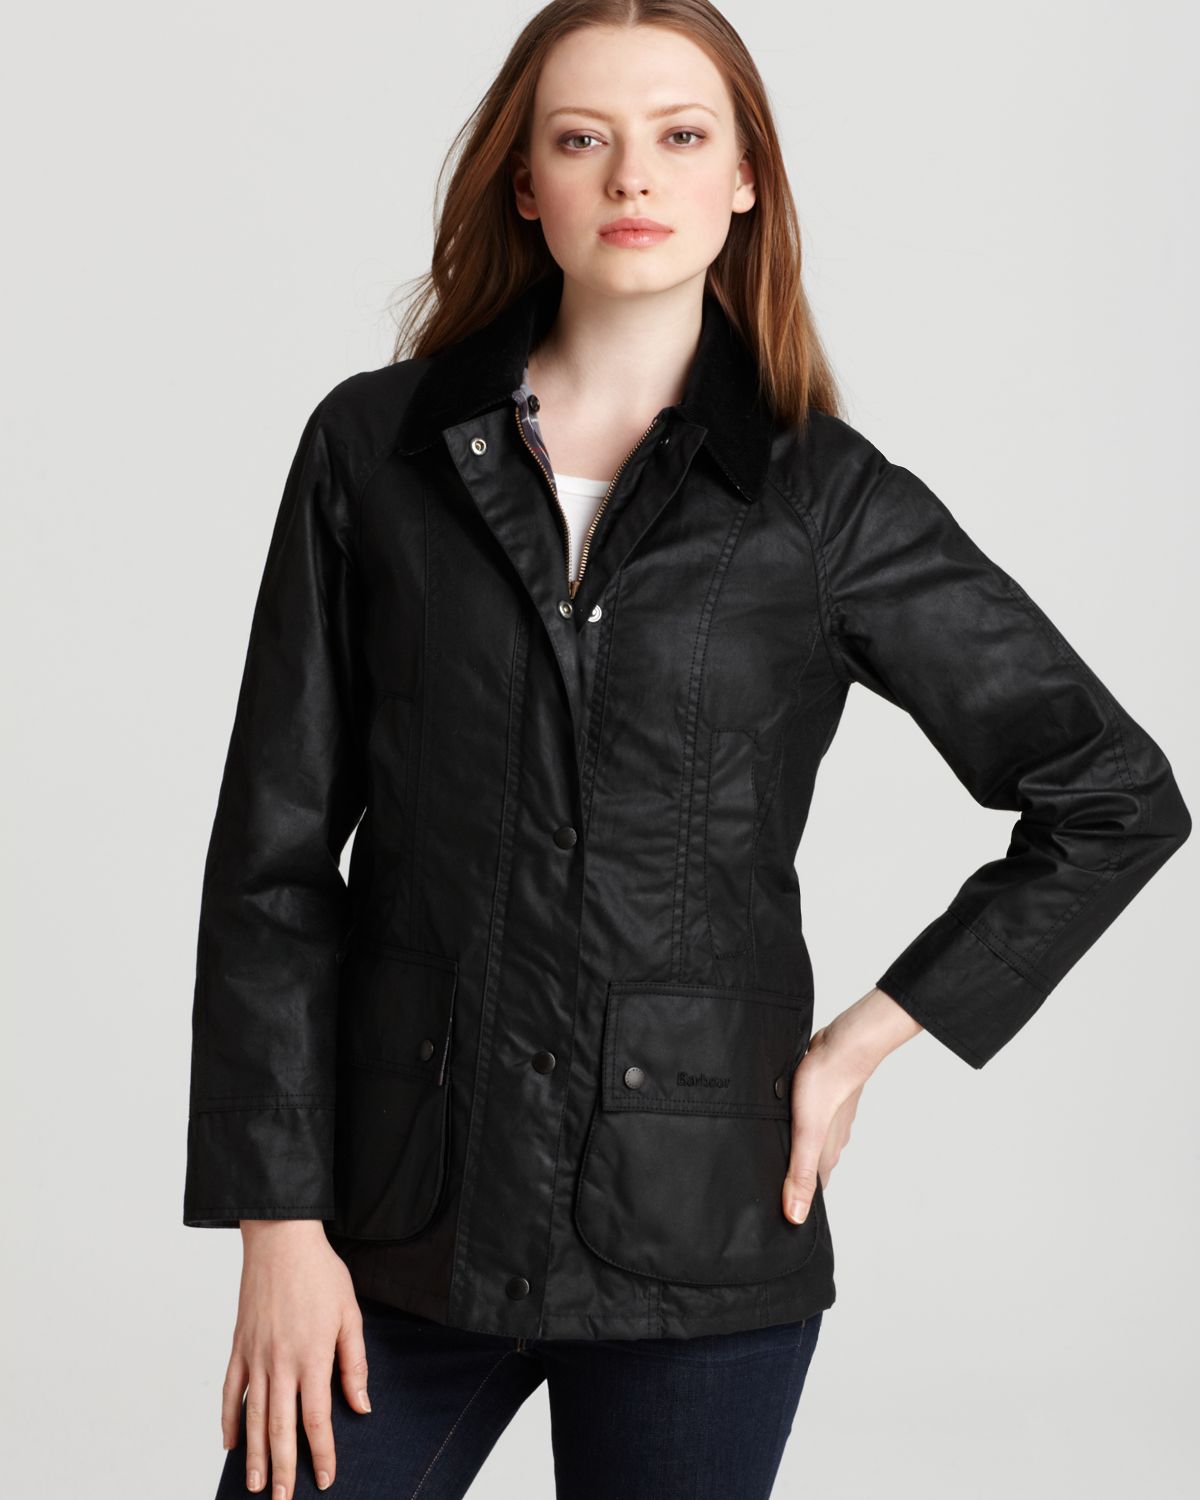 Barbour Beadnell Lightweight Clearance, 52% OFF | centro-innato.com